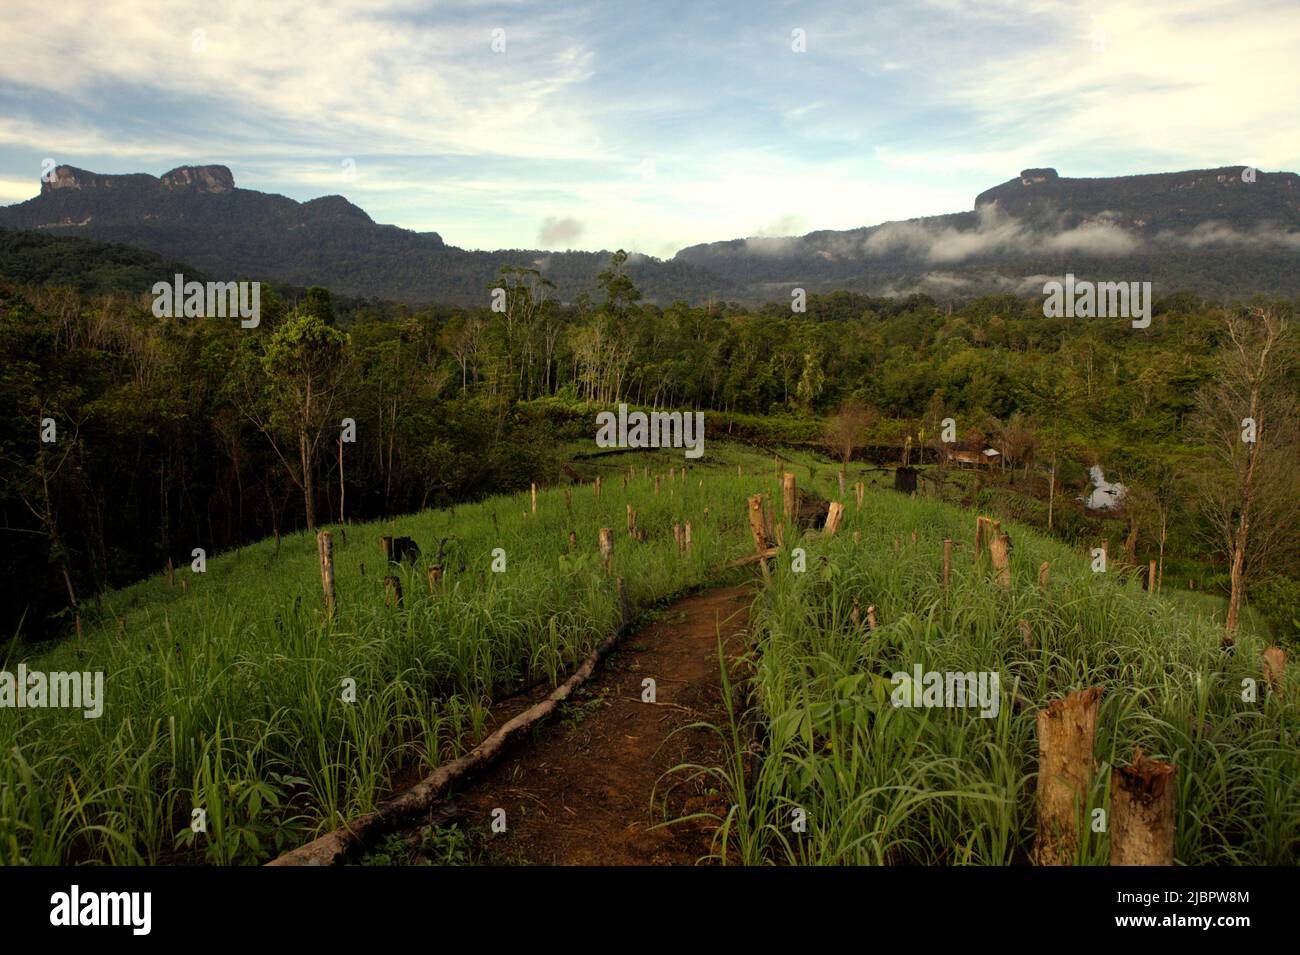 Agricultural field in a background of Amalambit hill and Bukit Tilung hill in Nanga Raun village, Kalis, Kapuas Hulu, West Kalimantan, Indonesia. Stock Photo